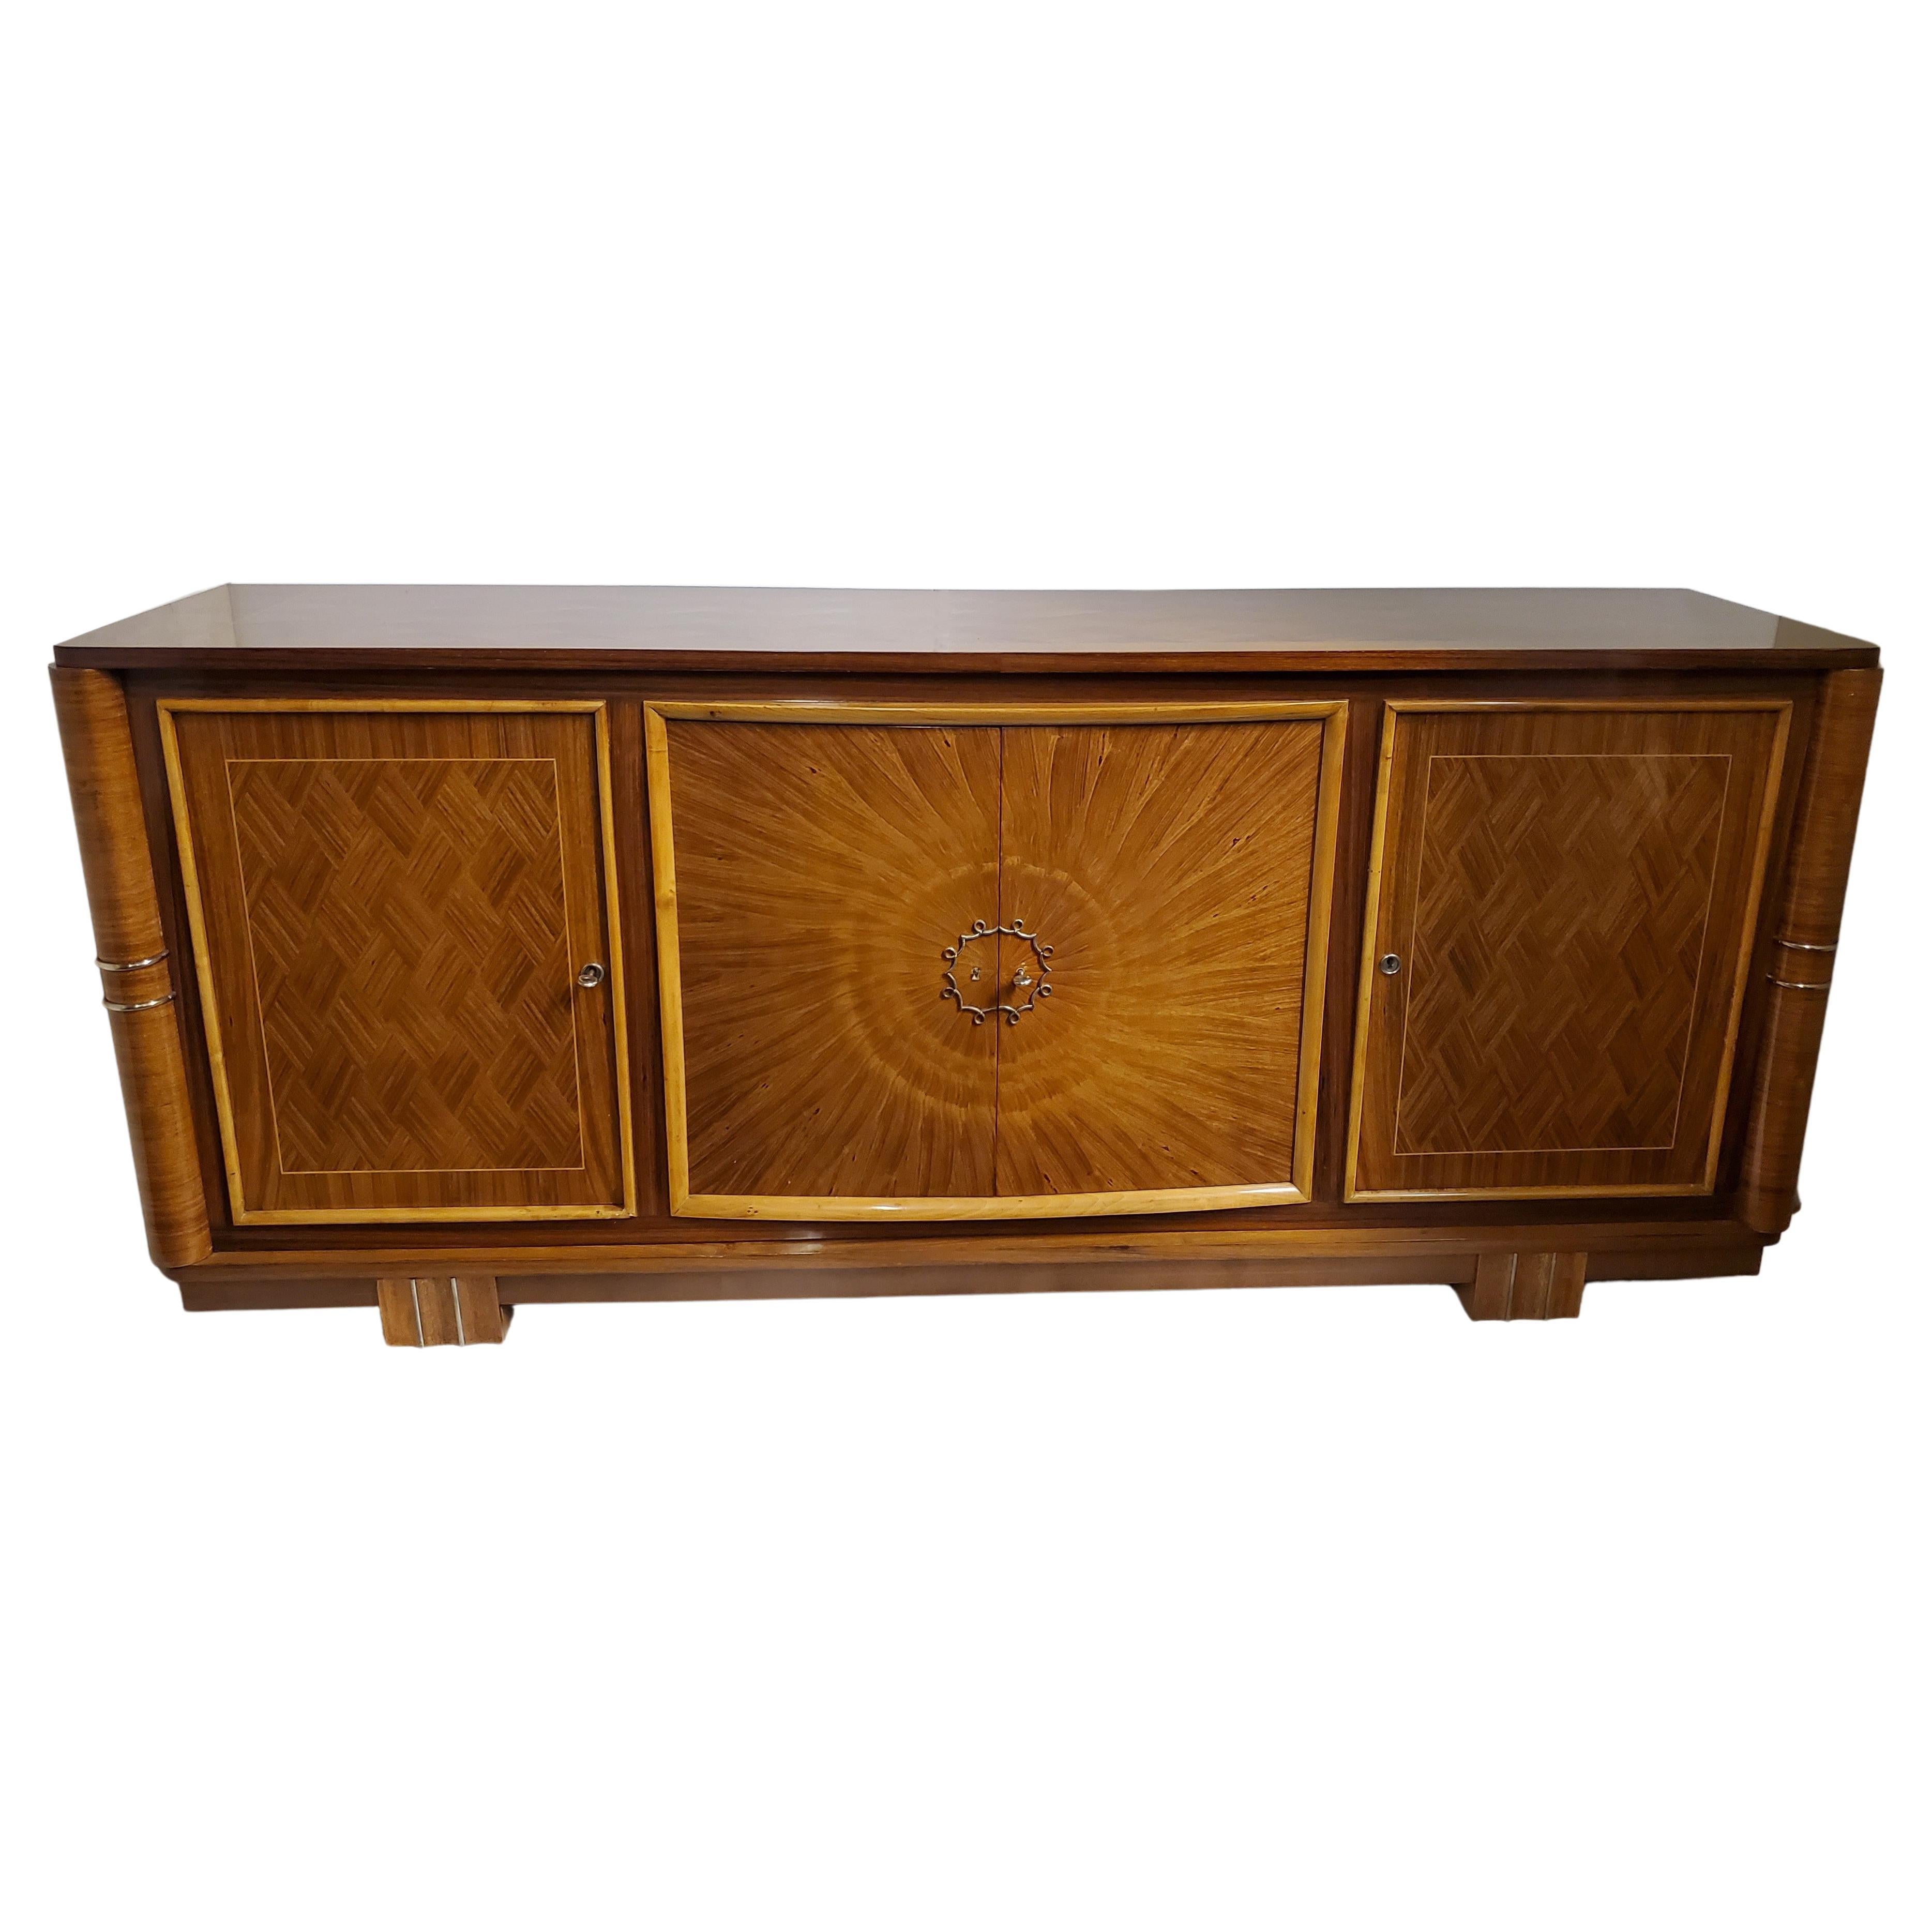 Fine French Parquetry and Marquetry Inlaid Sunburst Cabinet Att to Lucien Rollin For Sale 11